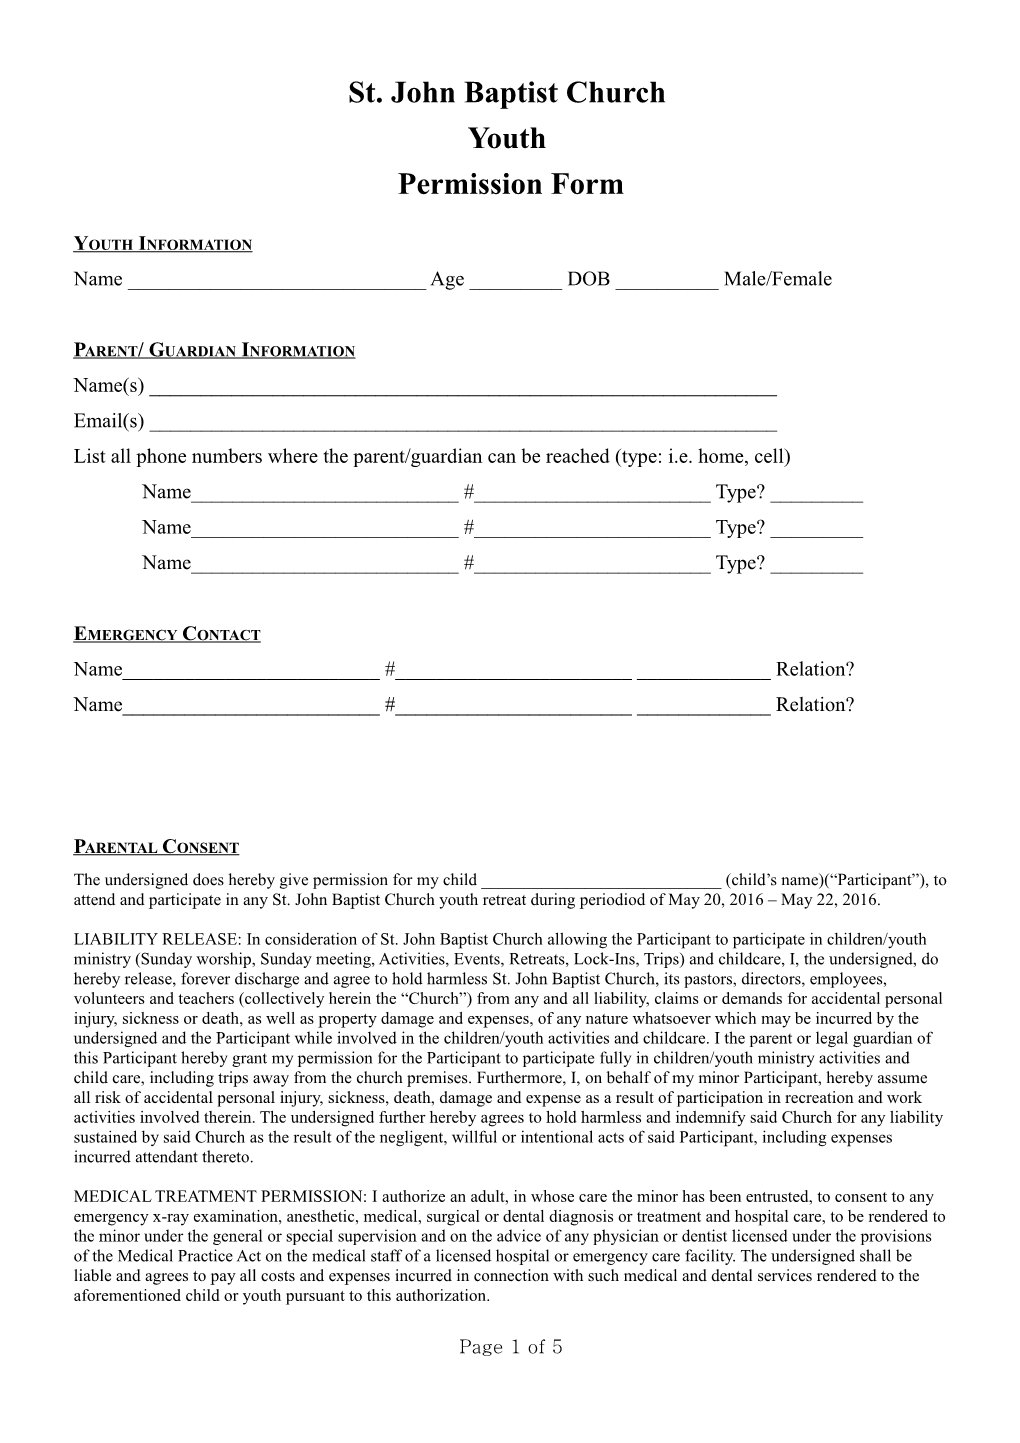 Parental Consent and Liability Release Form